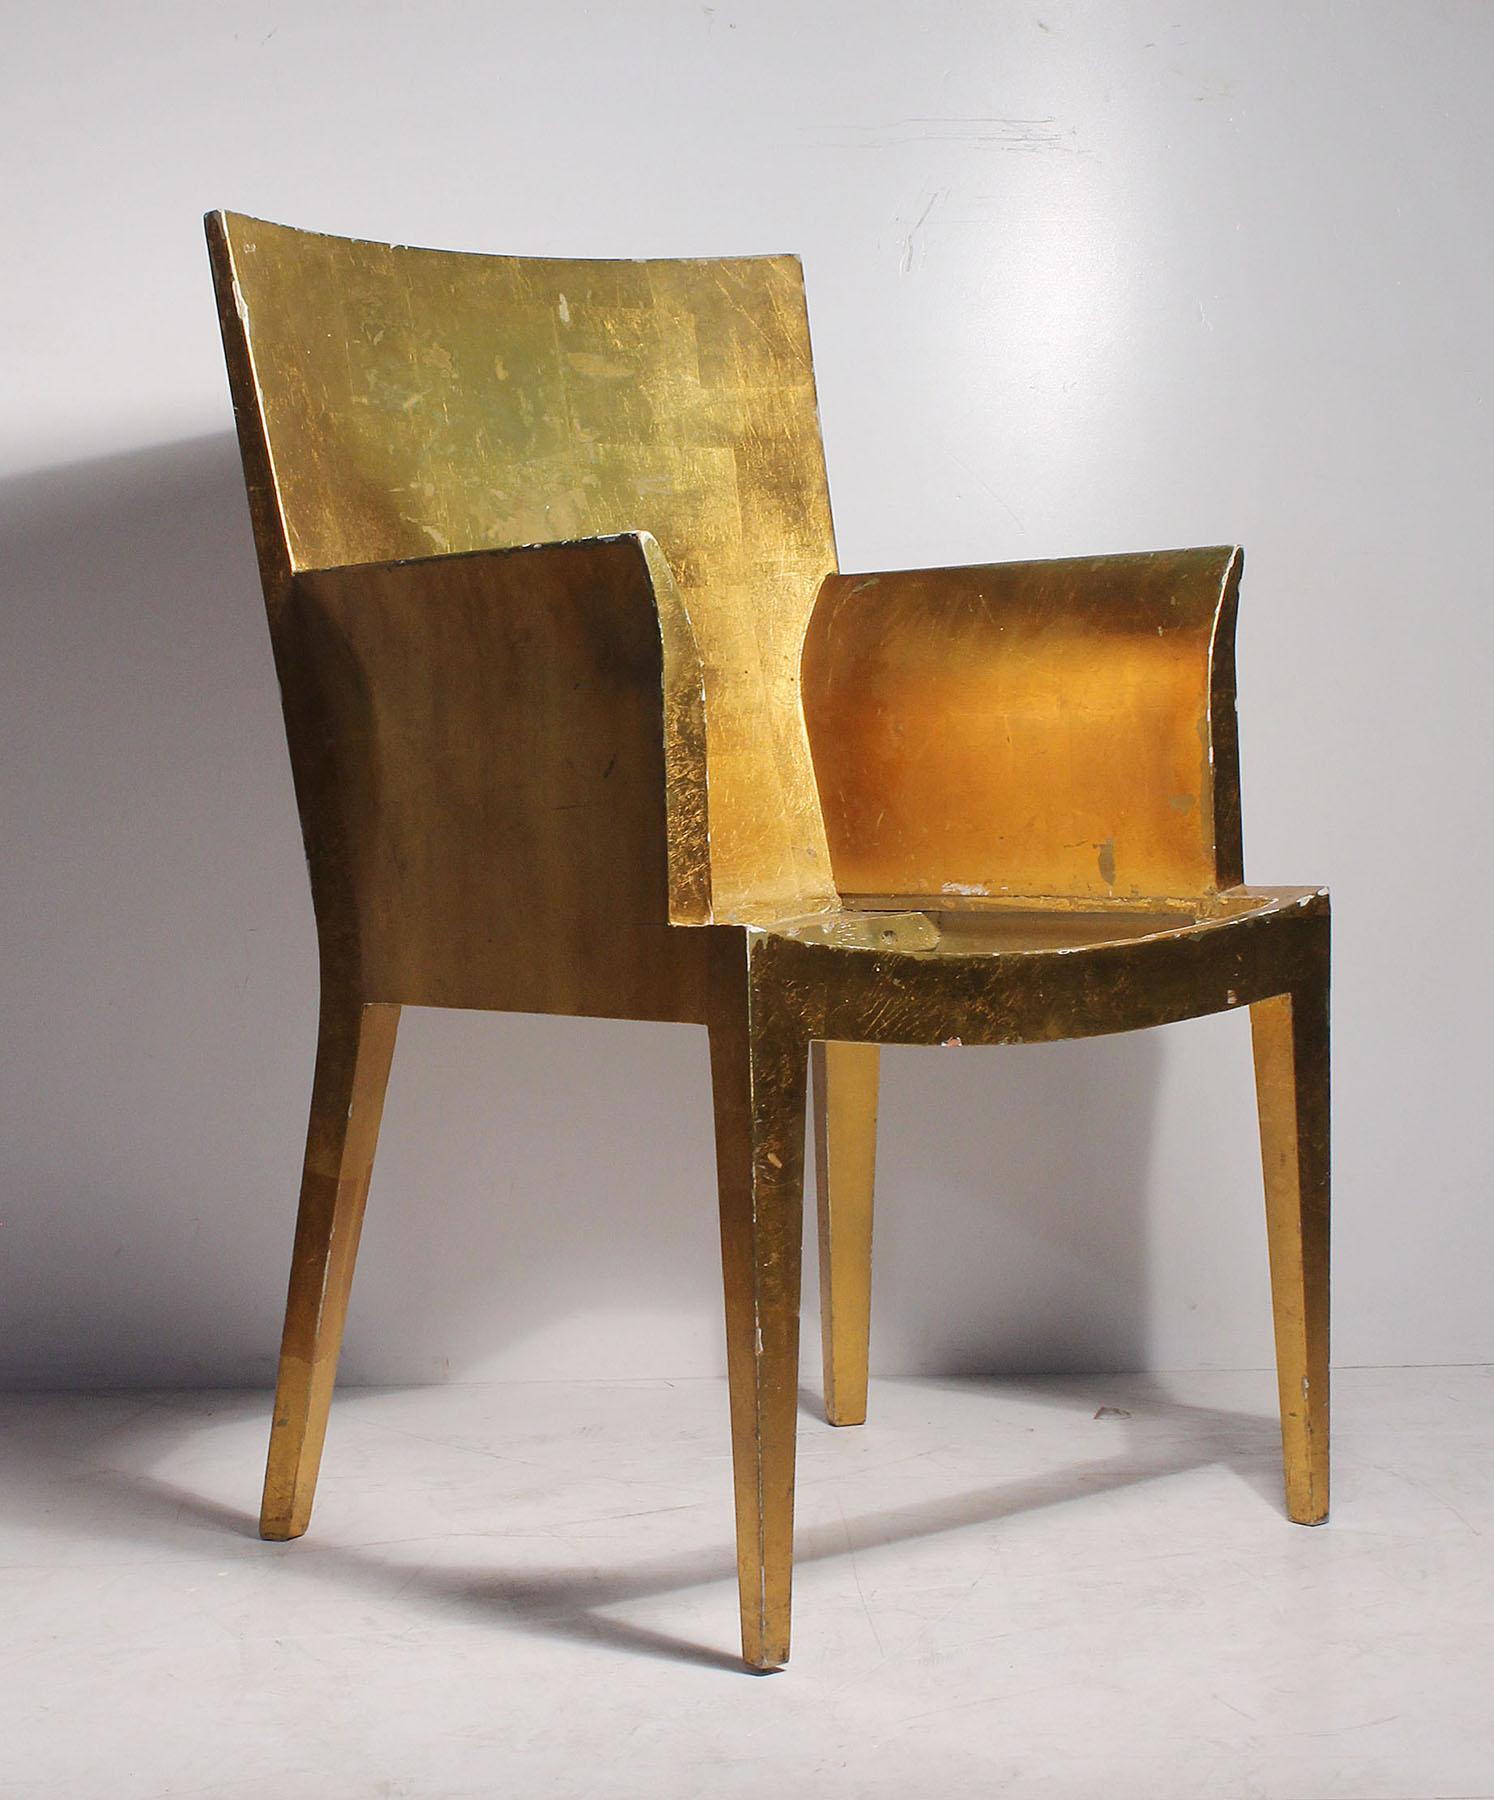 Beautiful vintage Karl Springer style chair by Jimeco. Designed by Enrique Garcel.
Applied gold leaf shows some loss as it stands right now.

